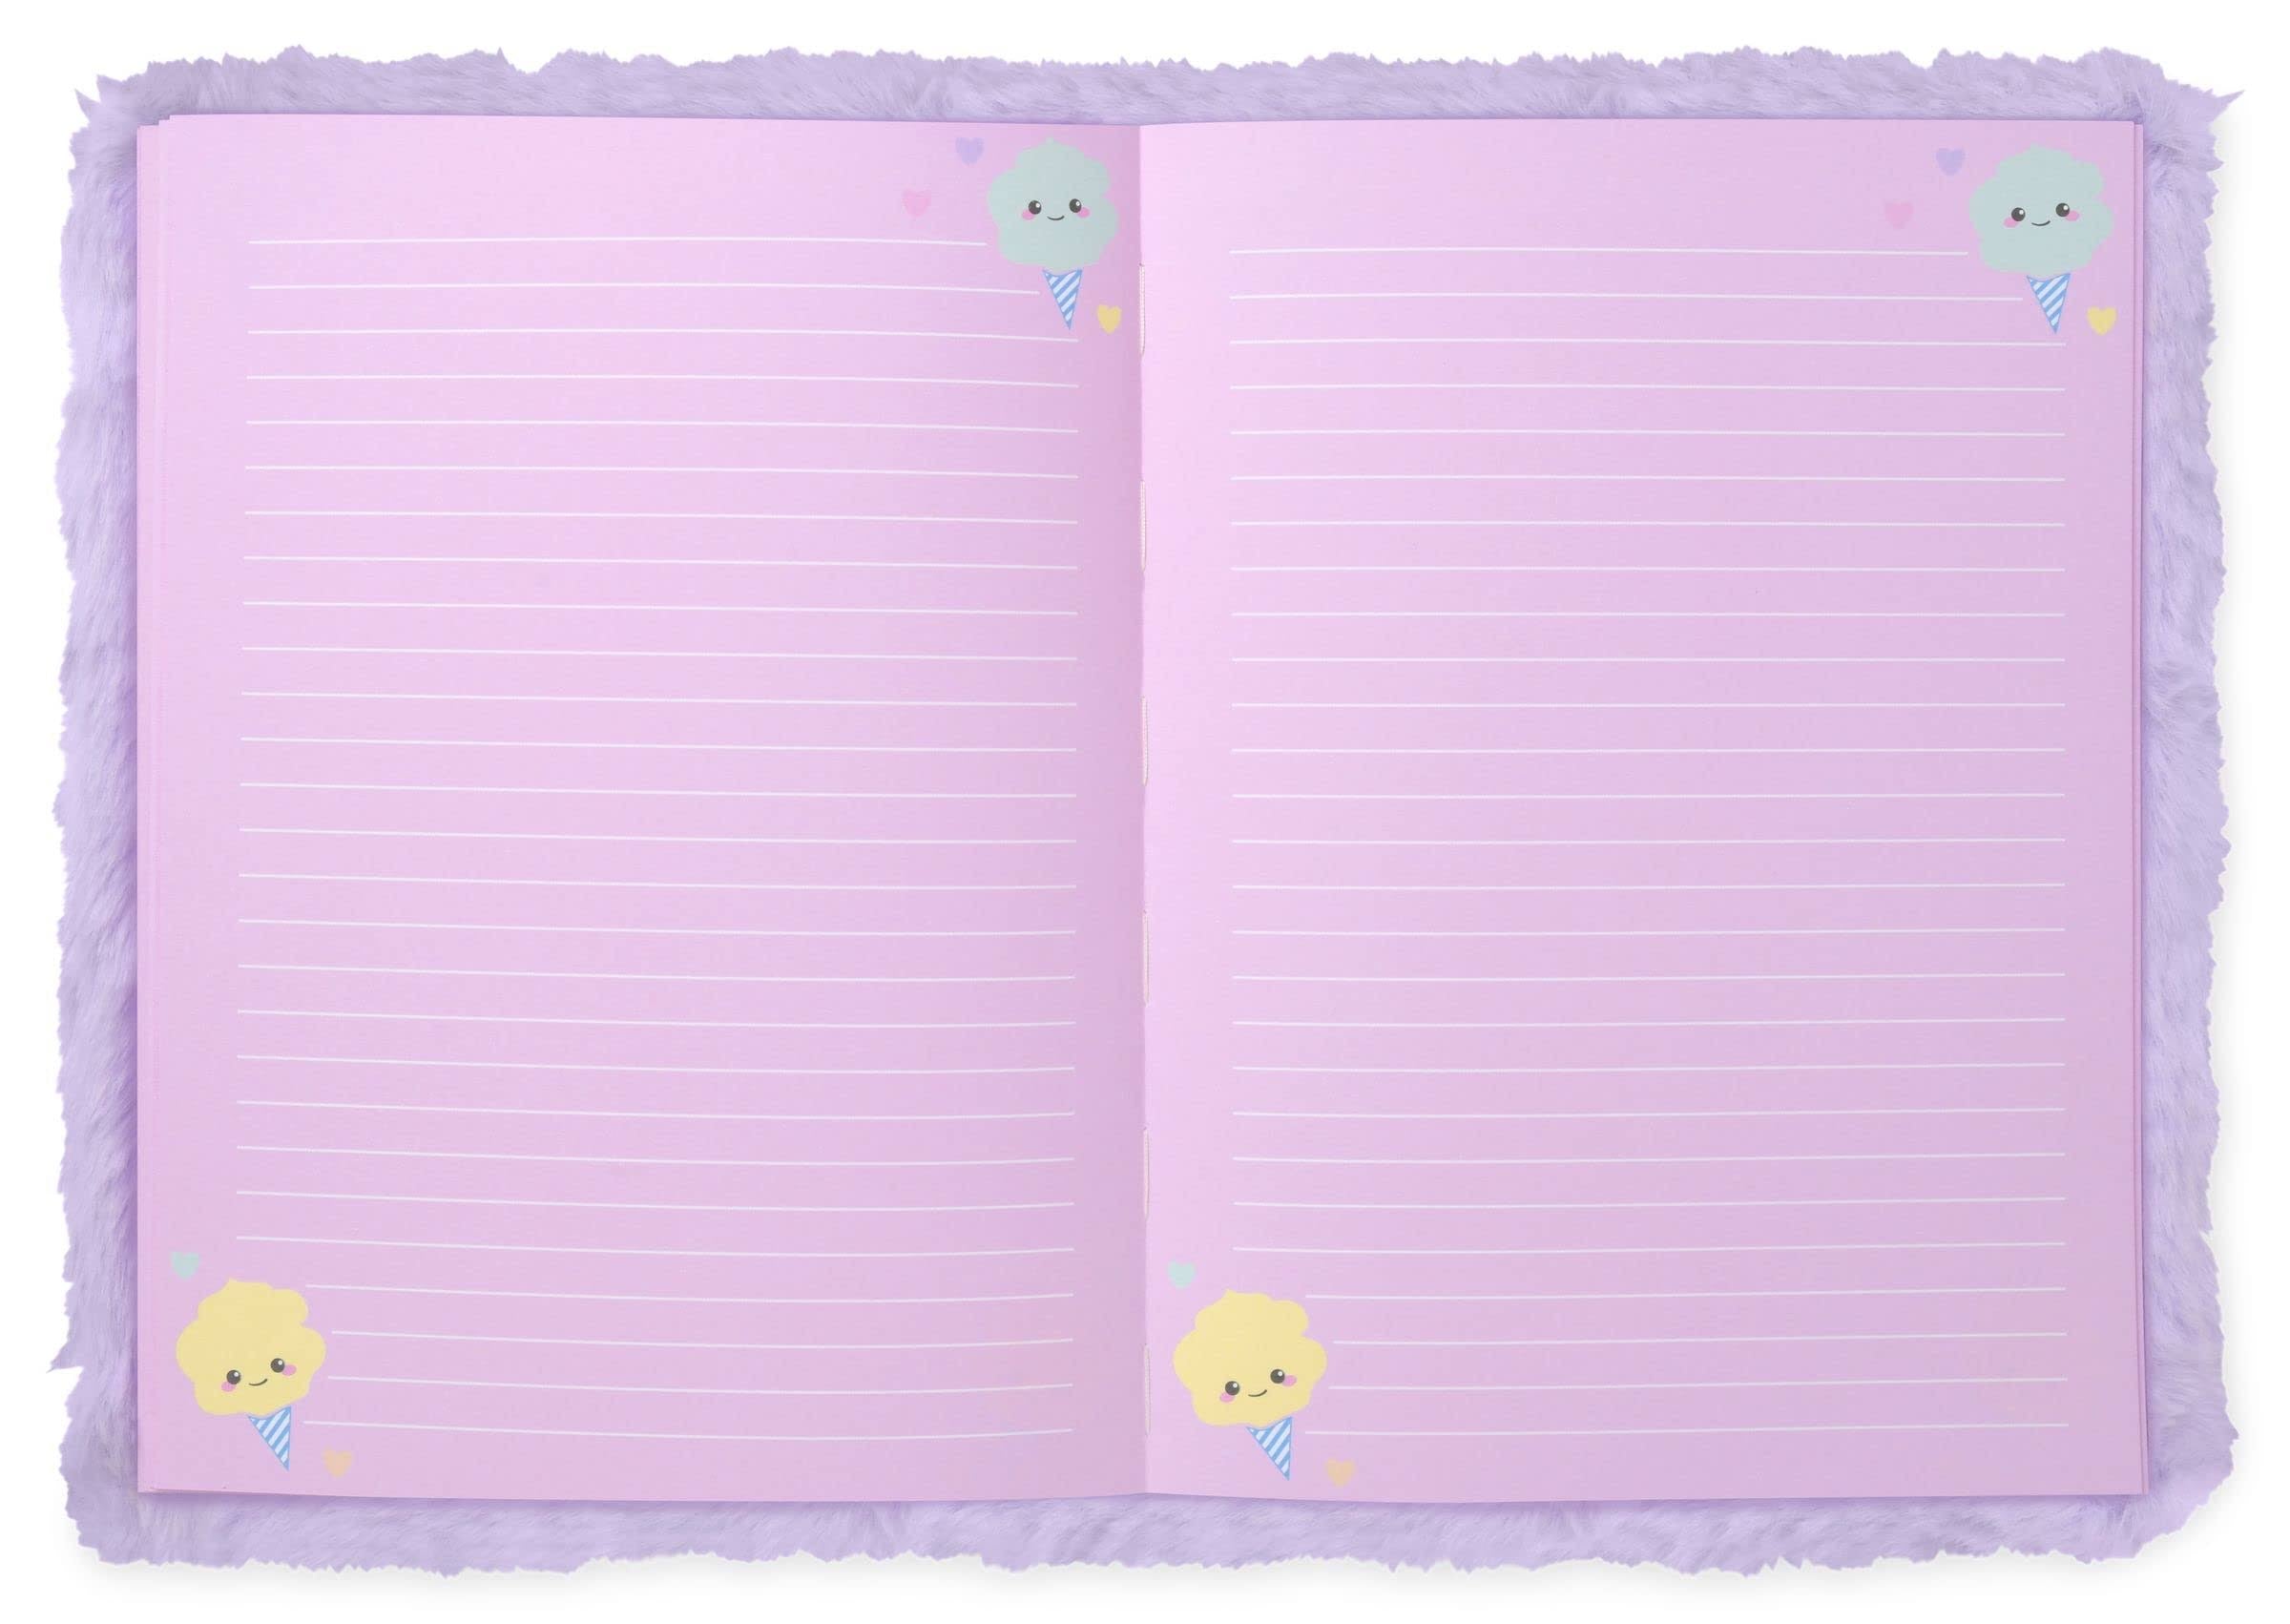 Cotton Candy Furry Journal by Iscream #724-943